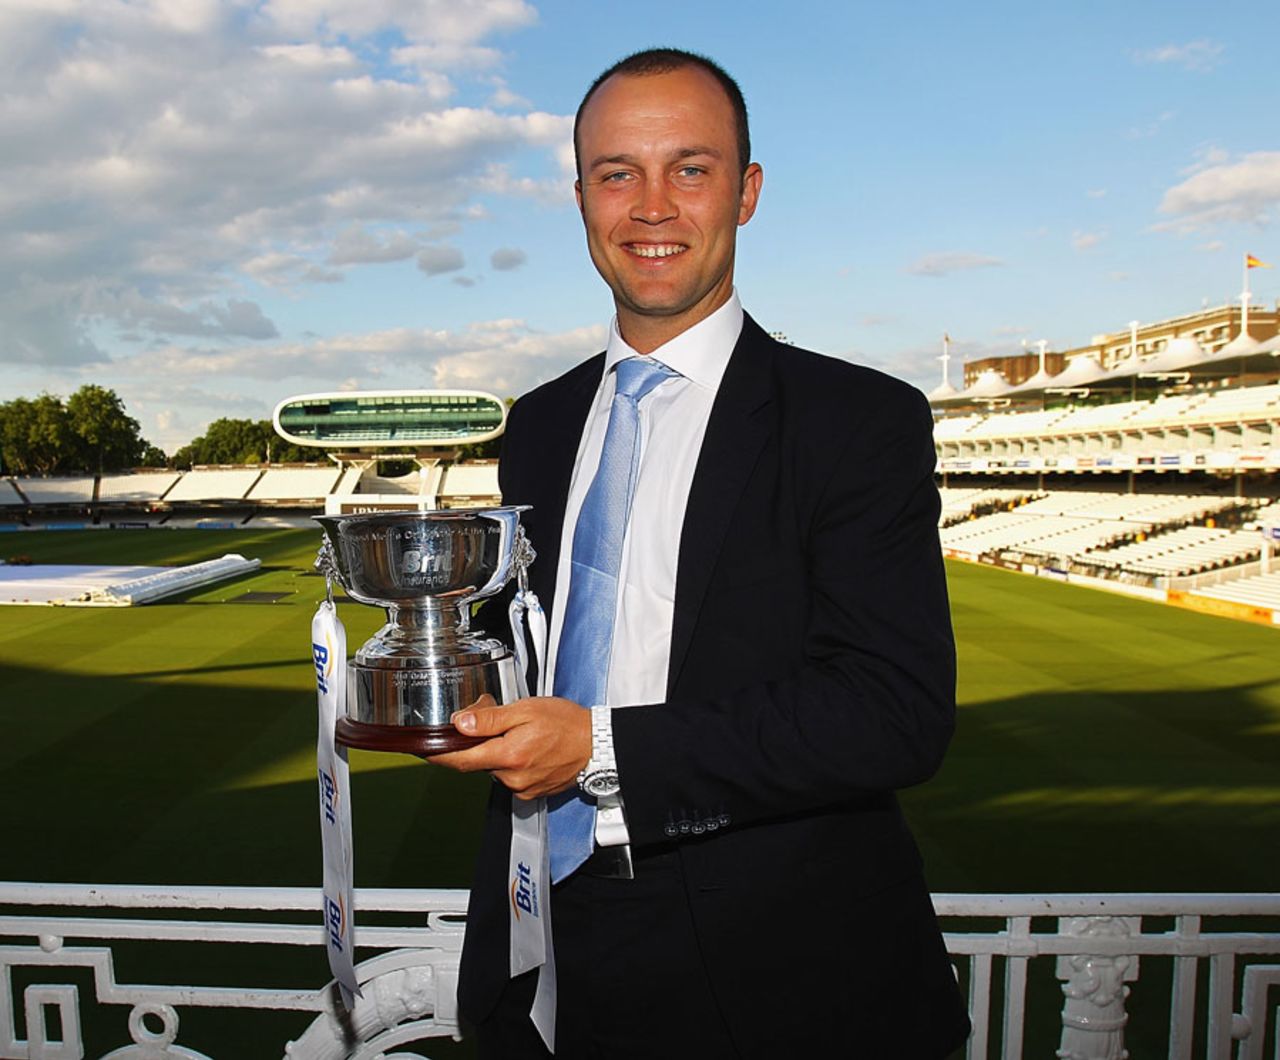 Jonathan Trott with the ECB award for men's cricketer of the year, Lord's, London, May 31, 2011